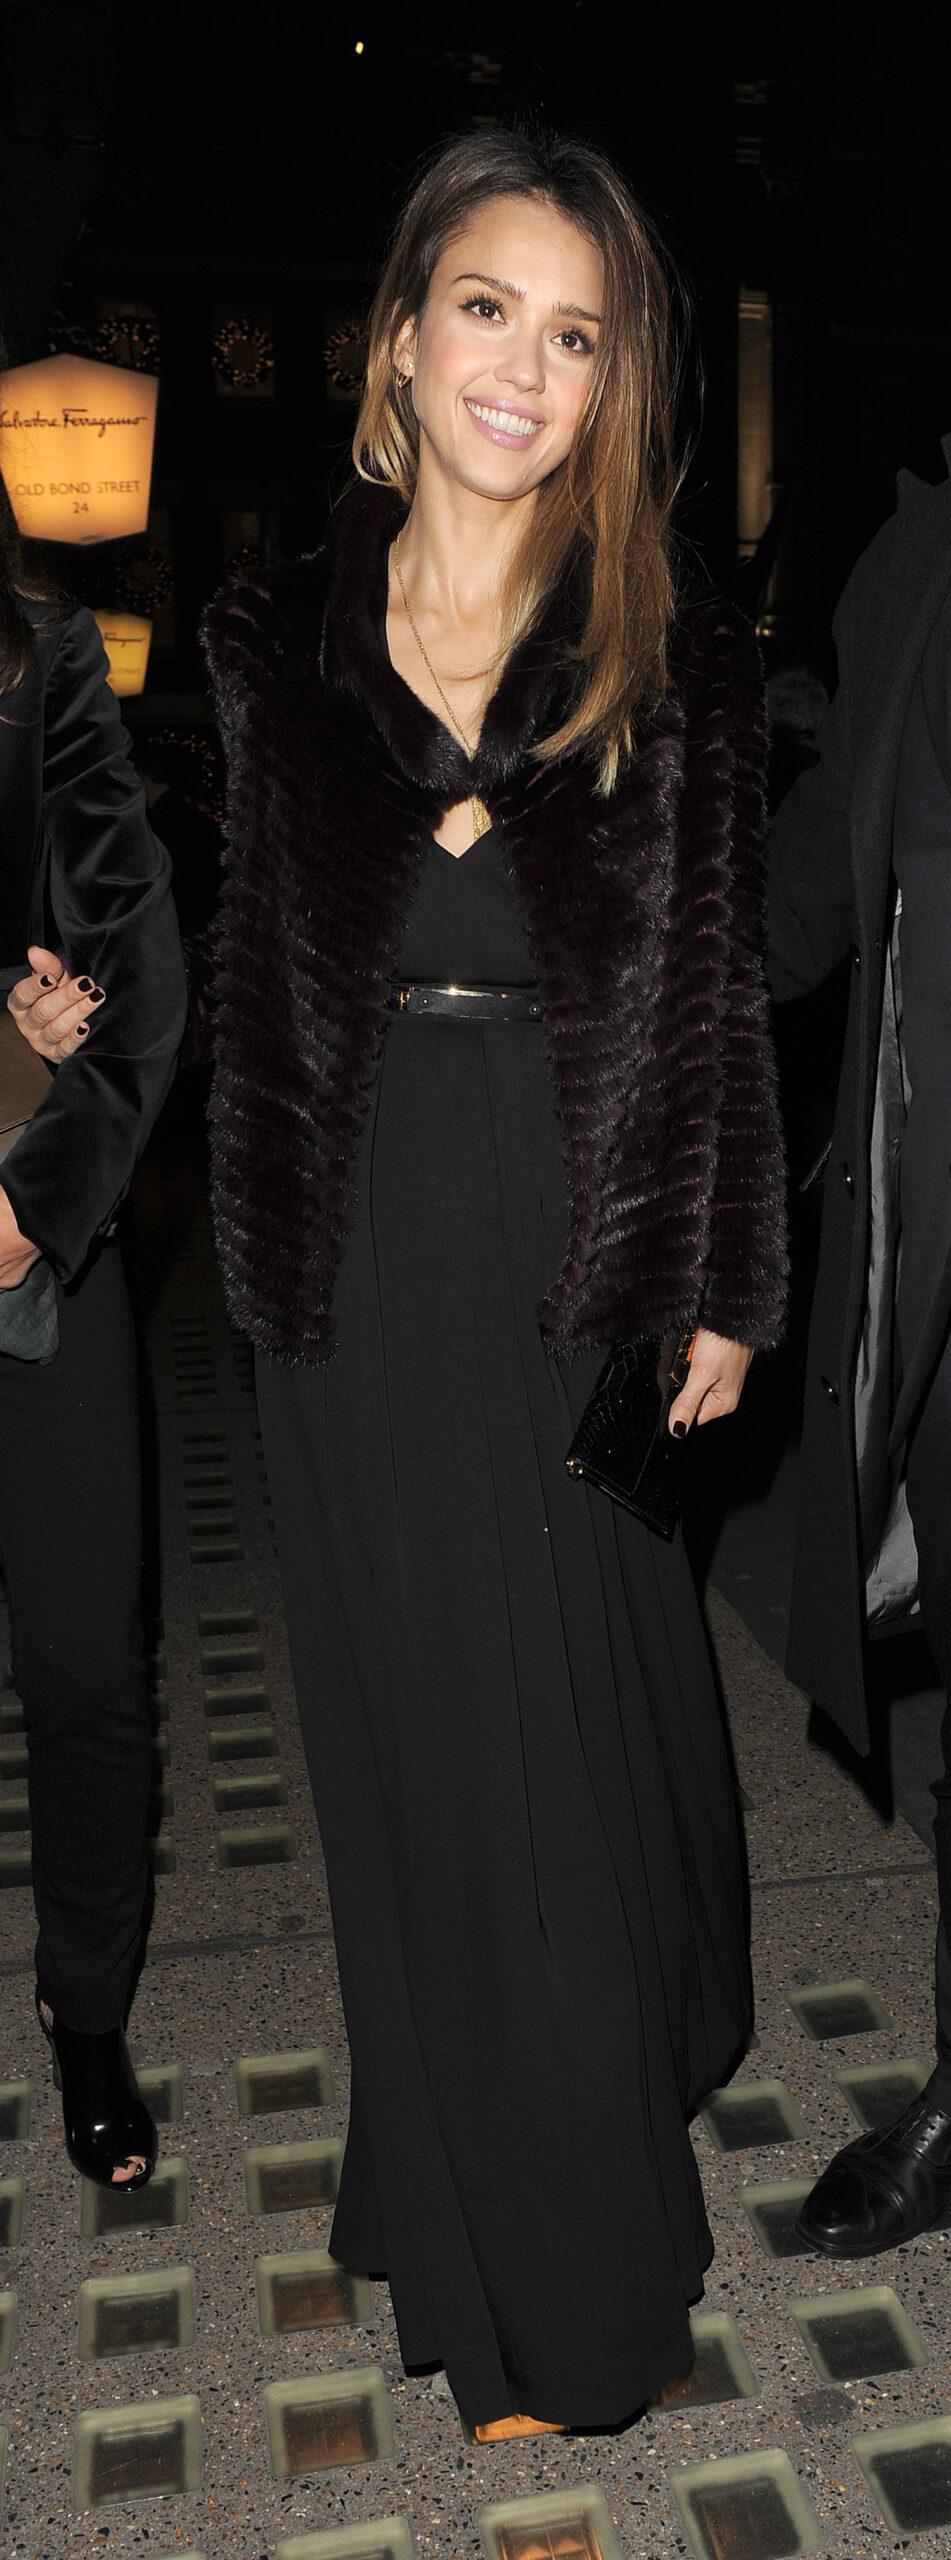 Jessica Alba arriving at the Salvator Ferragamo flagship store launch party on Bond Street in Mayfair The actress wore a fur coat and a black dress